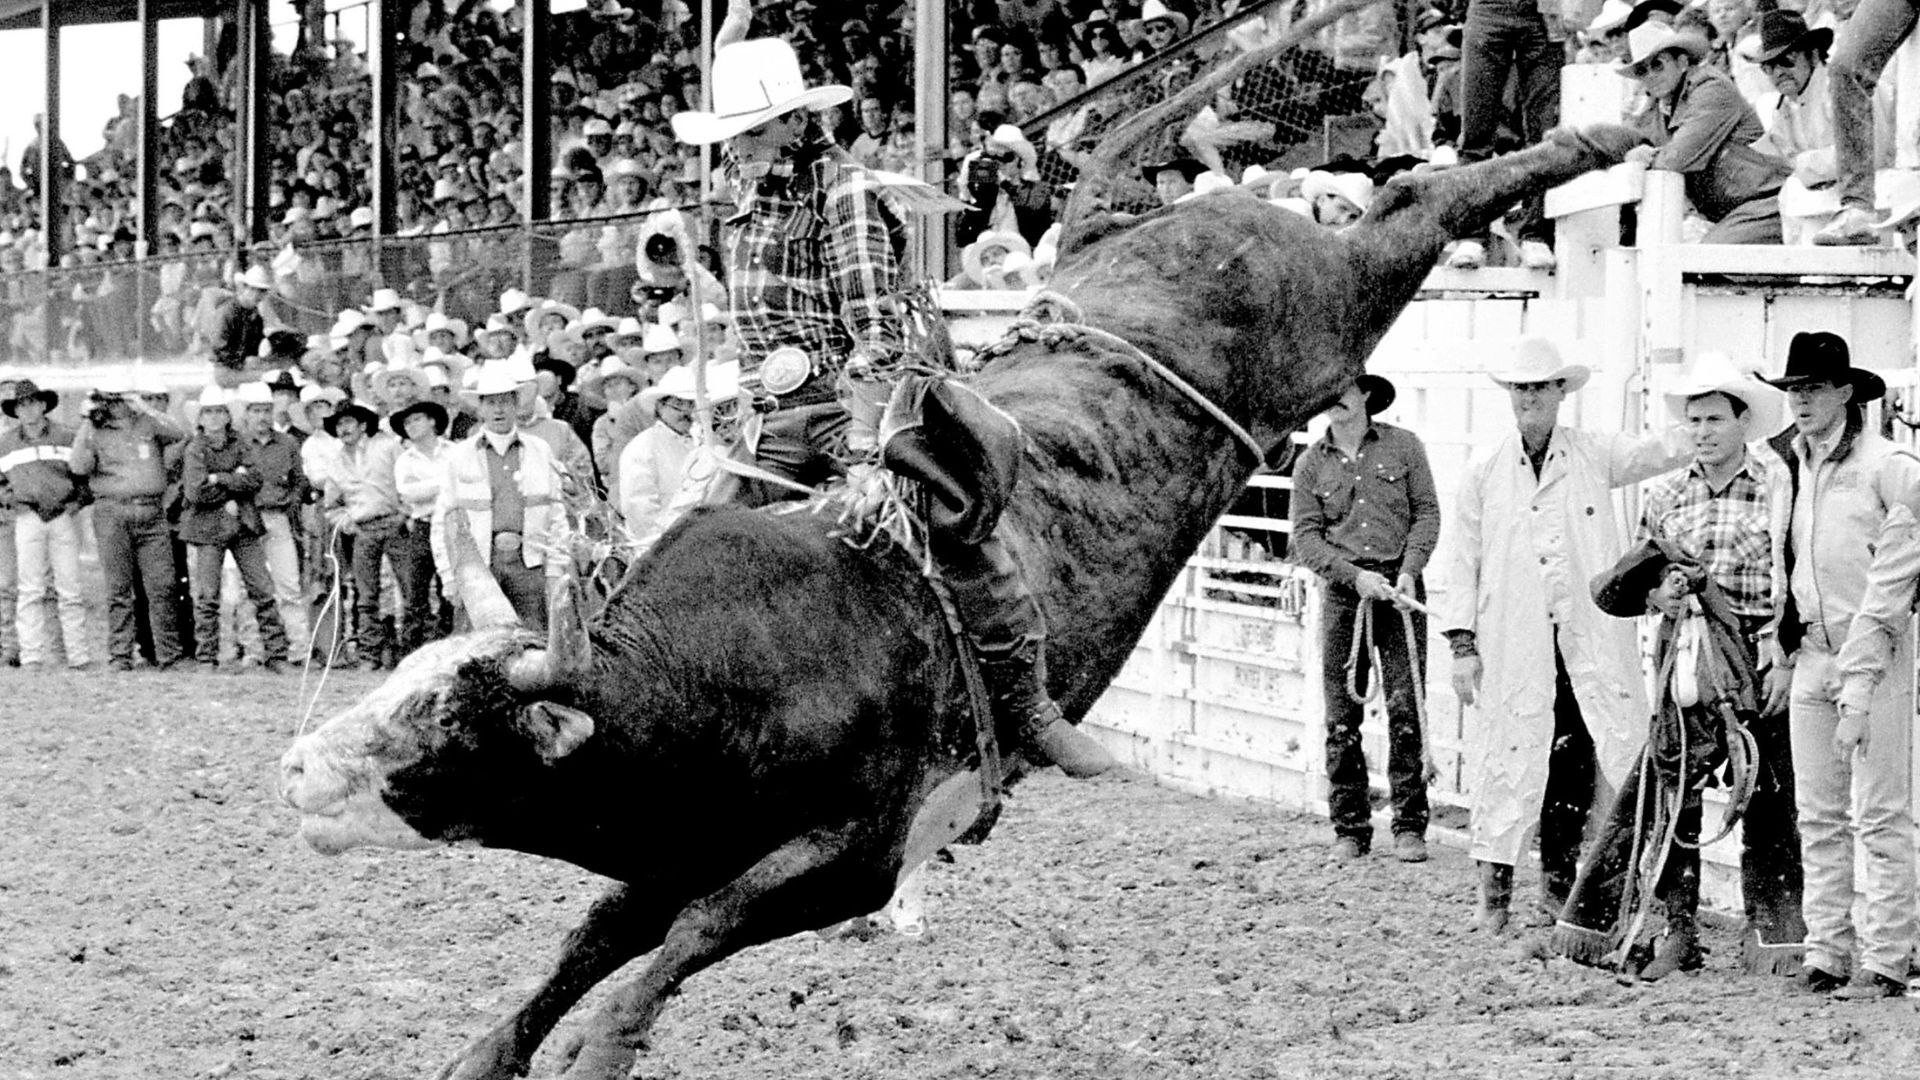 Randy Wagner was shooting that day in 1989 at the Cheyenne Frontier Days Rodeo when Lane Frost made what would be his last bull ride.